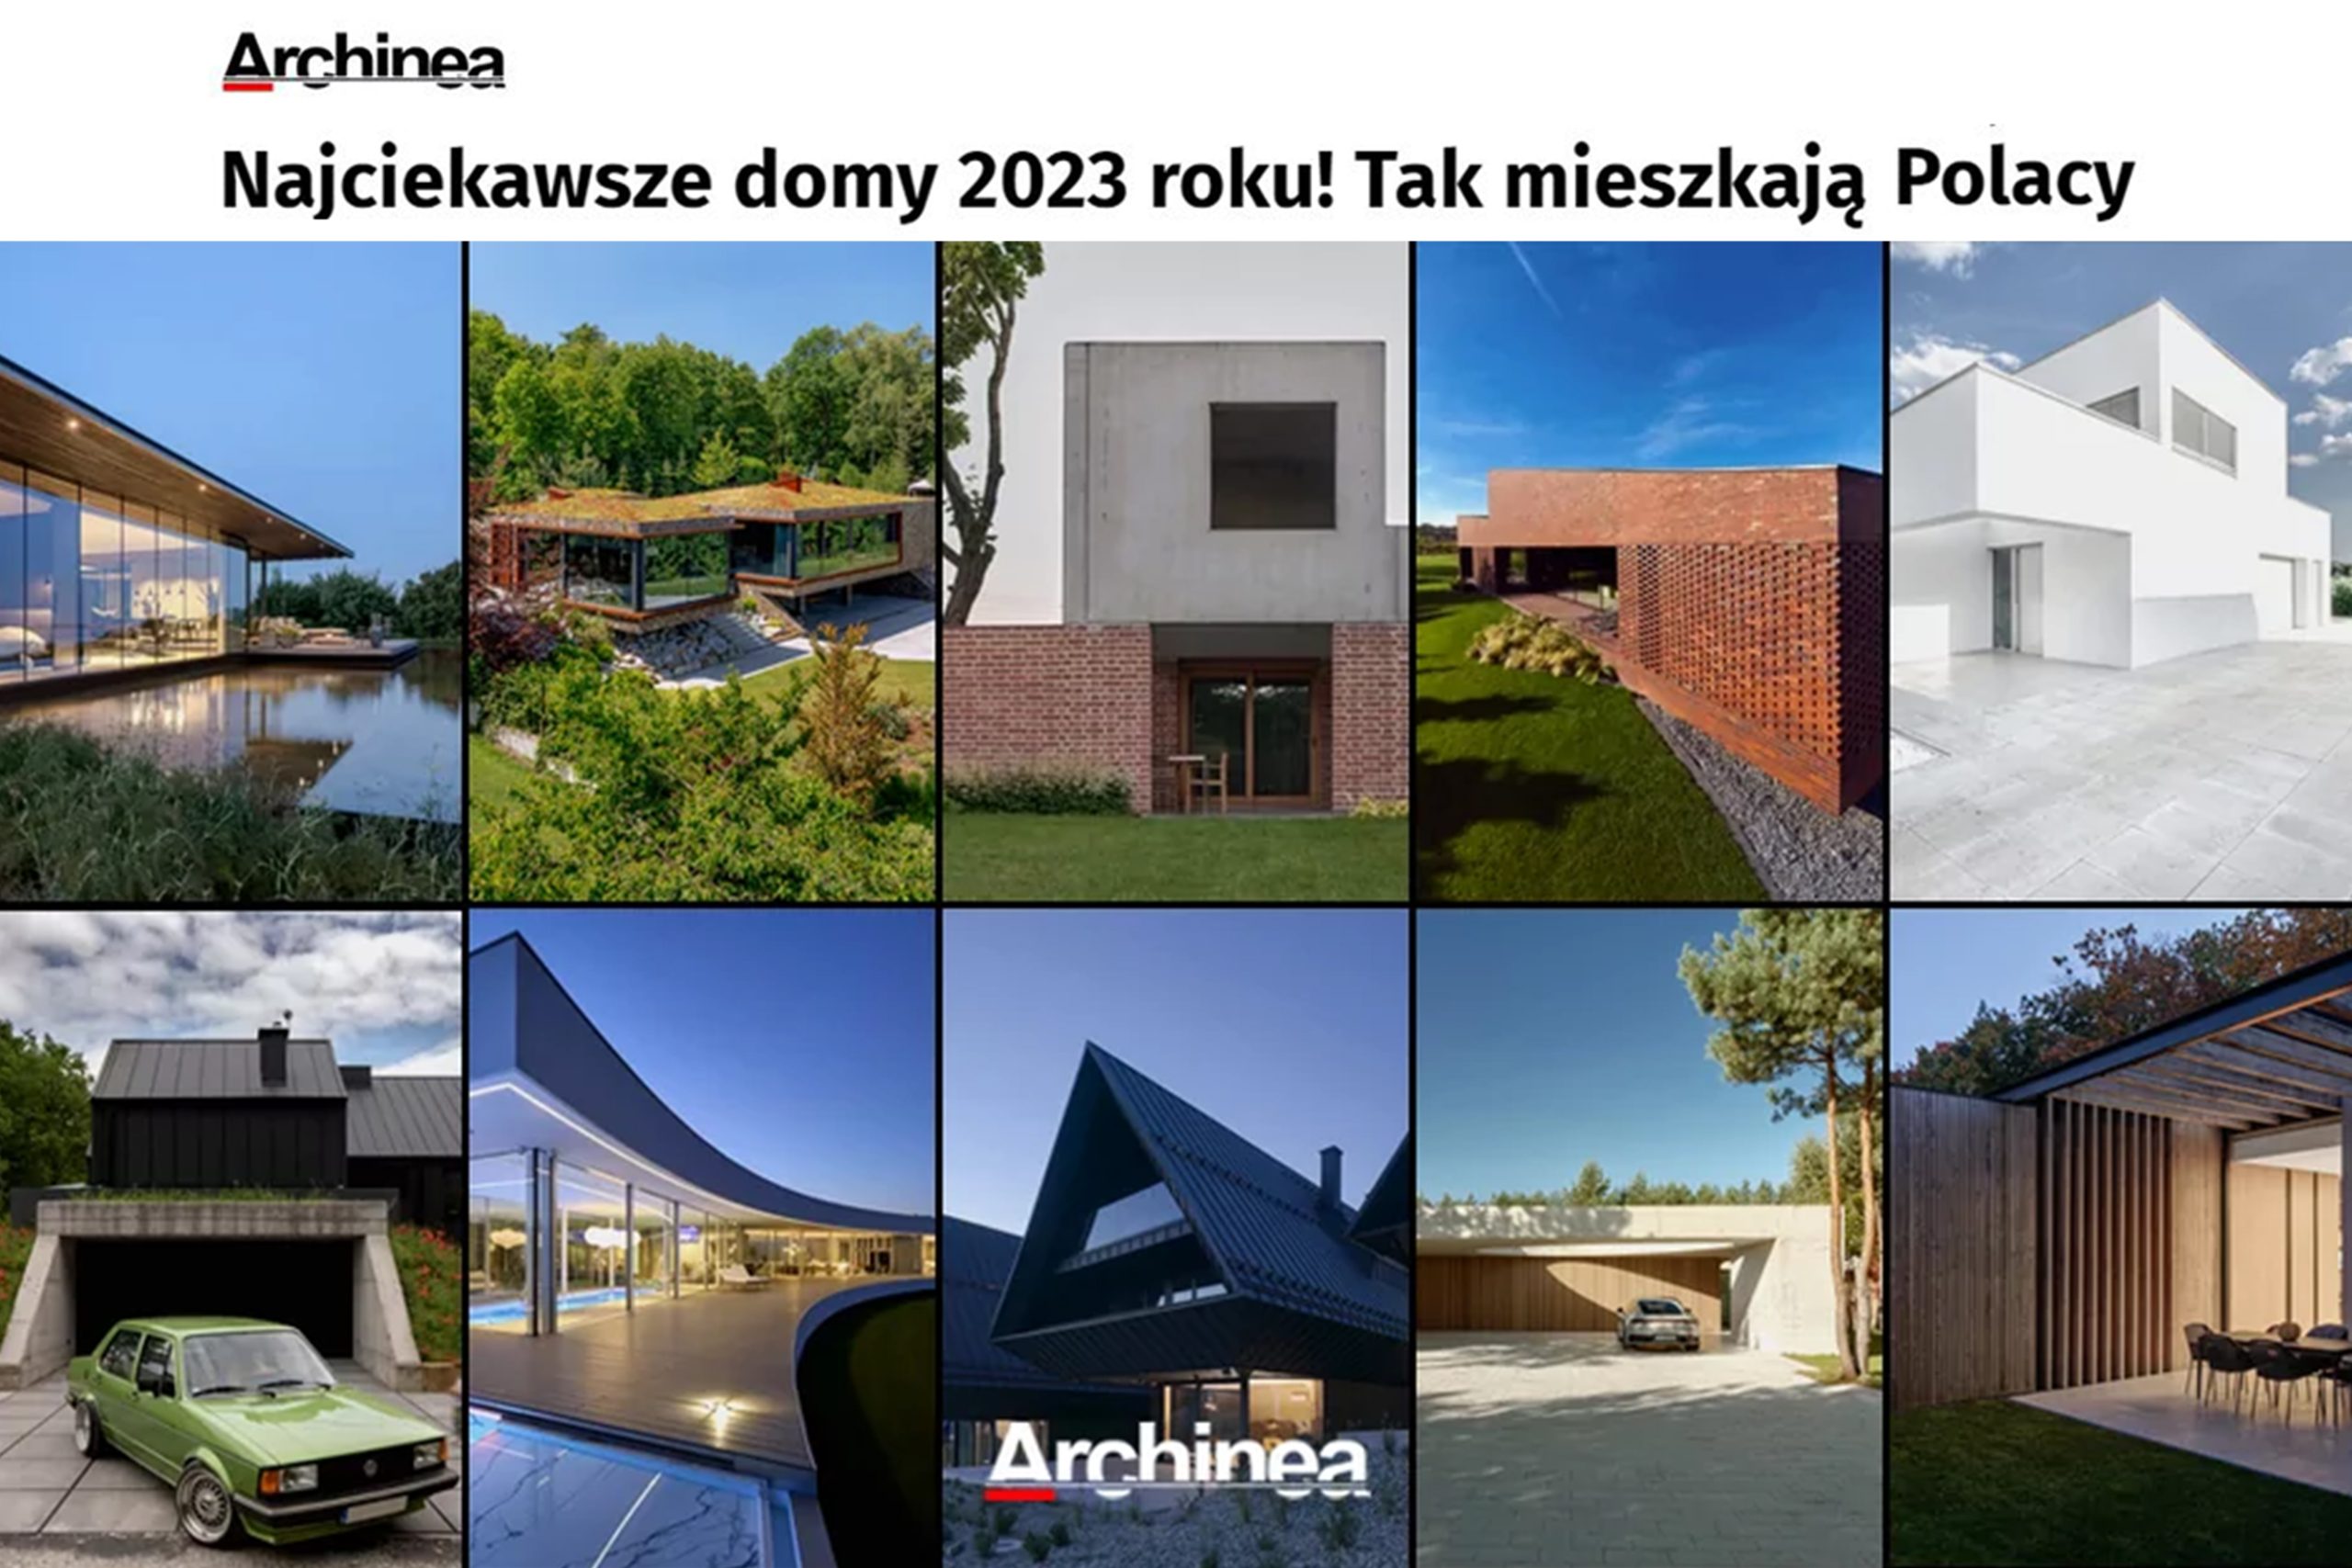 Mława House is among the best projects of 2023